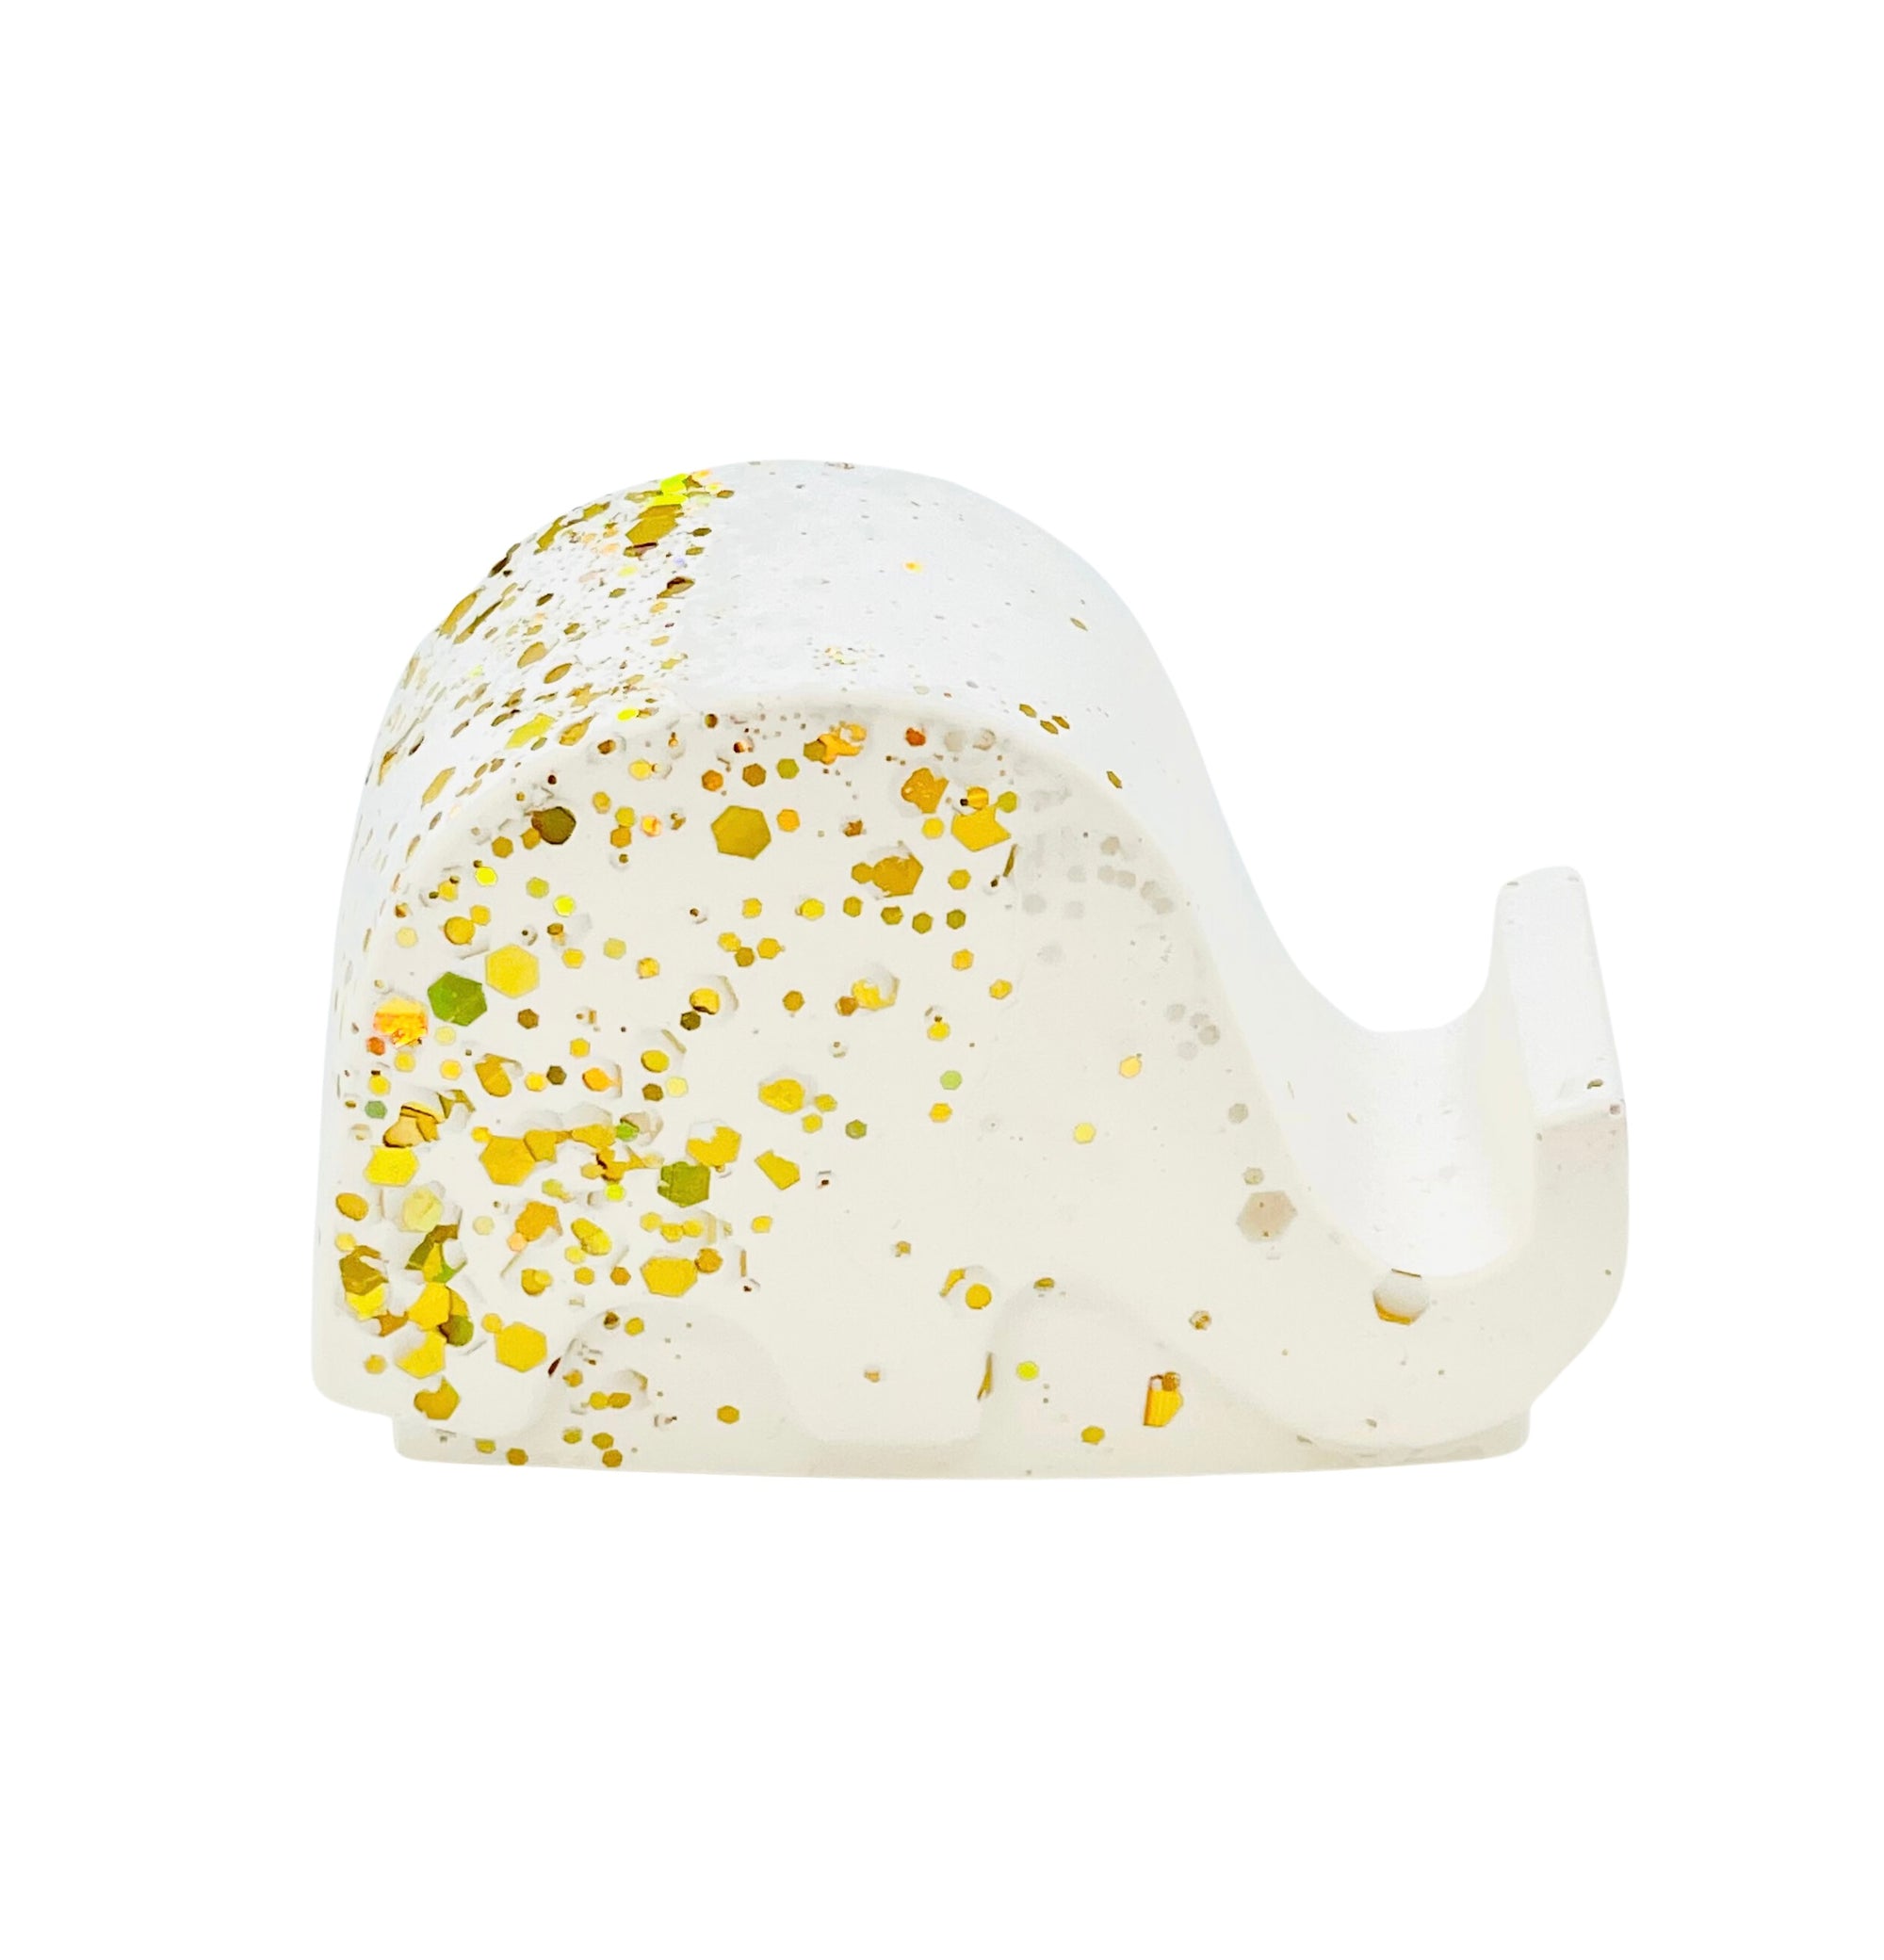 A white Jesmonite elephant mobile phone stand measuring 6.5cm in length sprinkled with gold glitter.